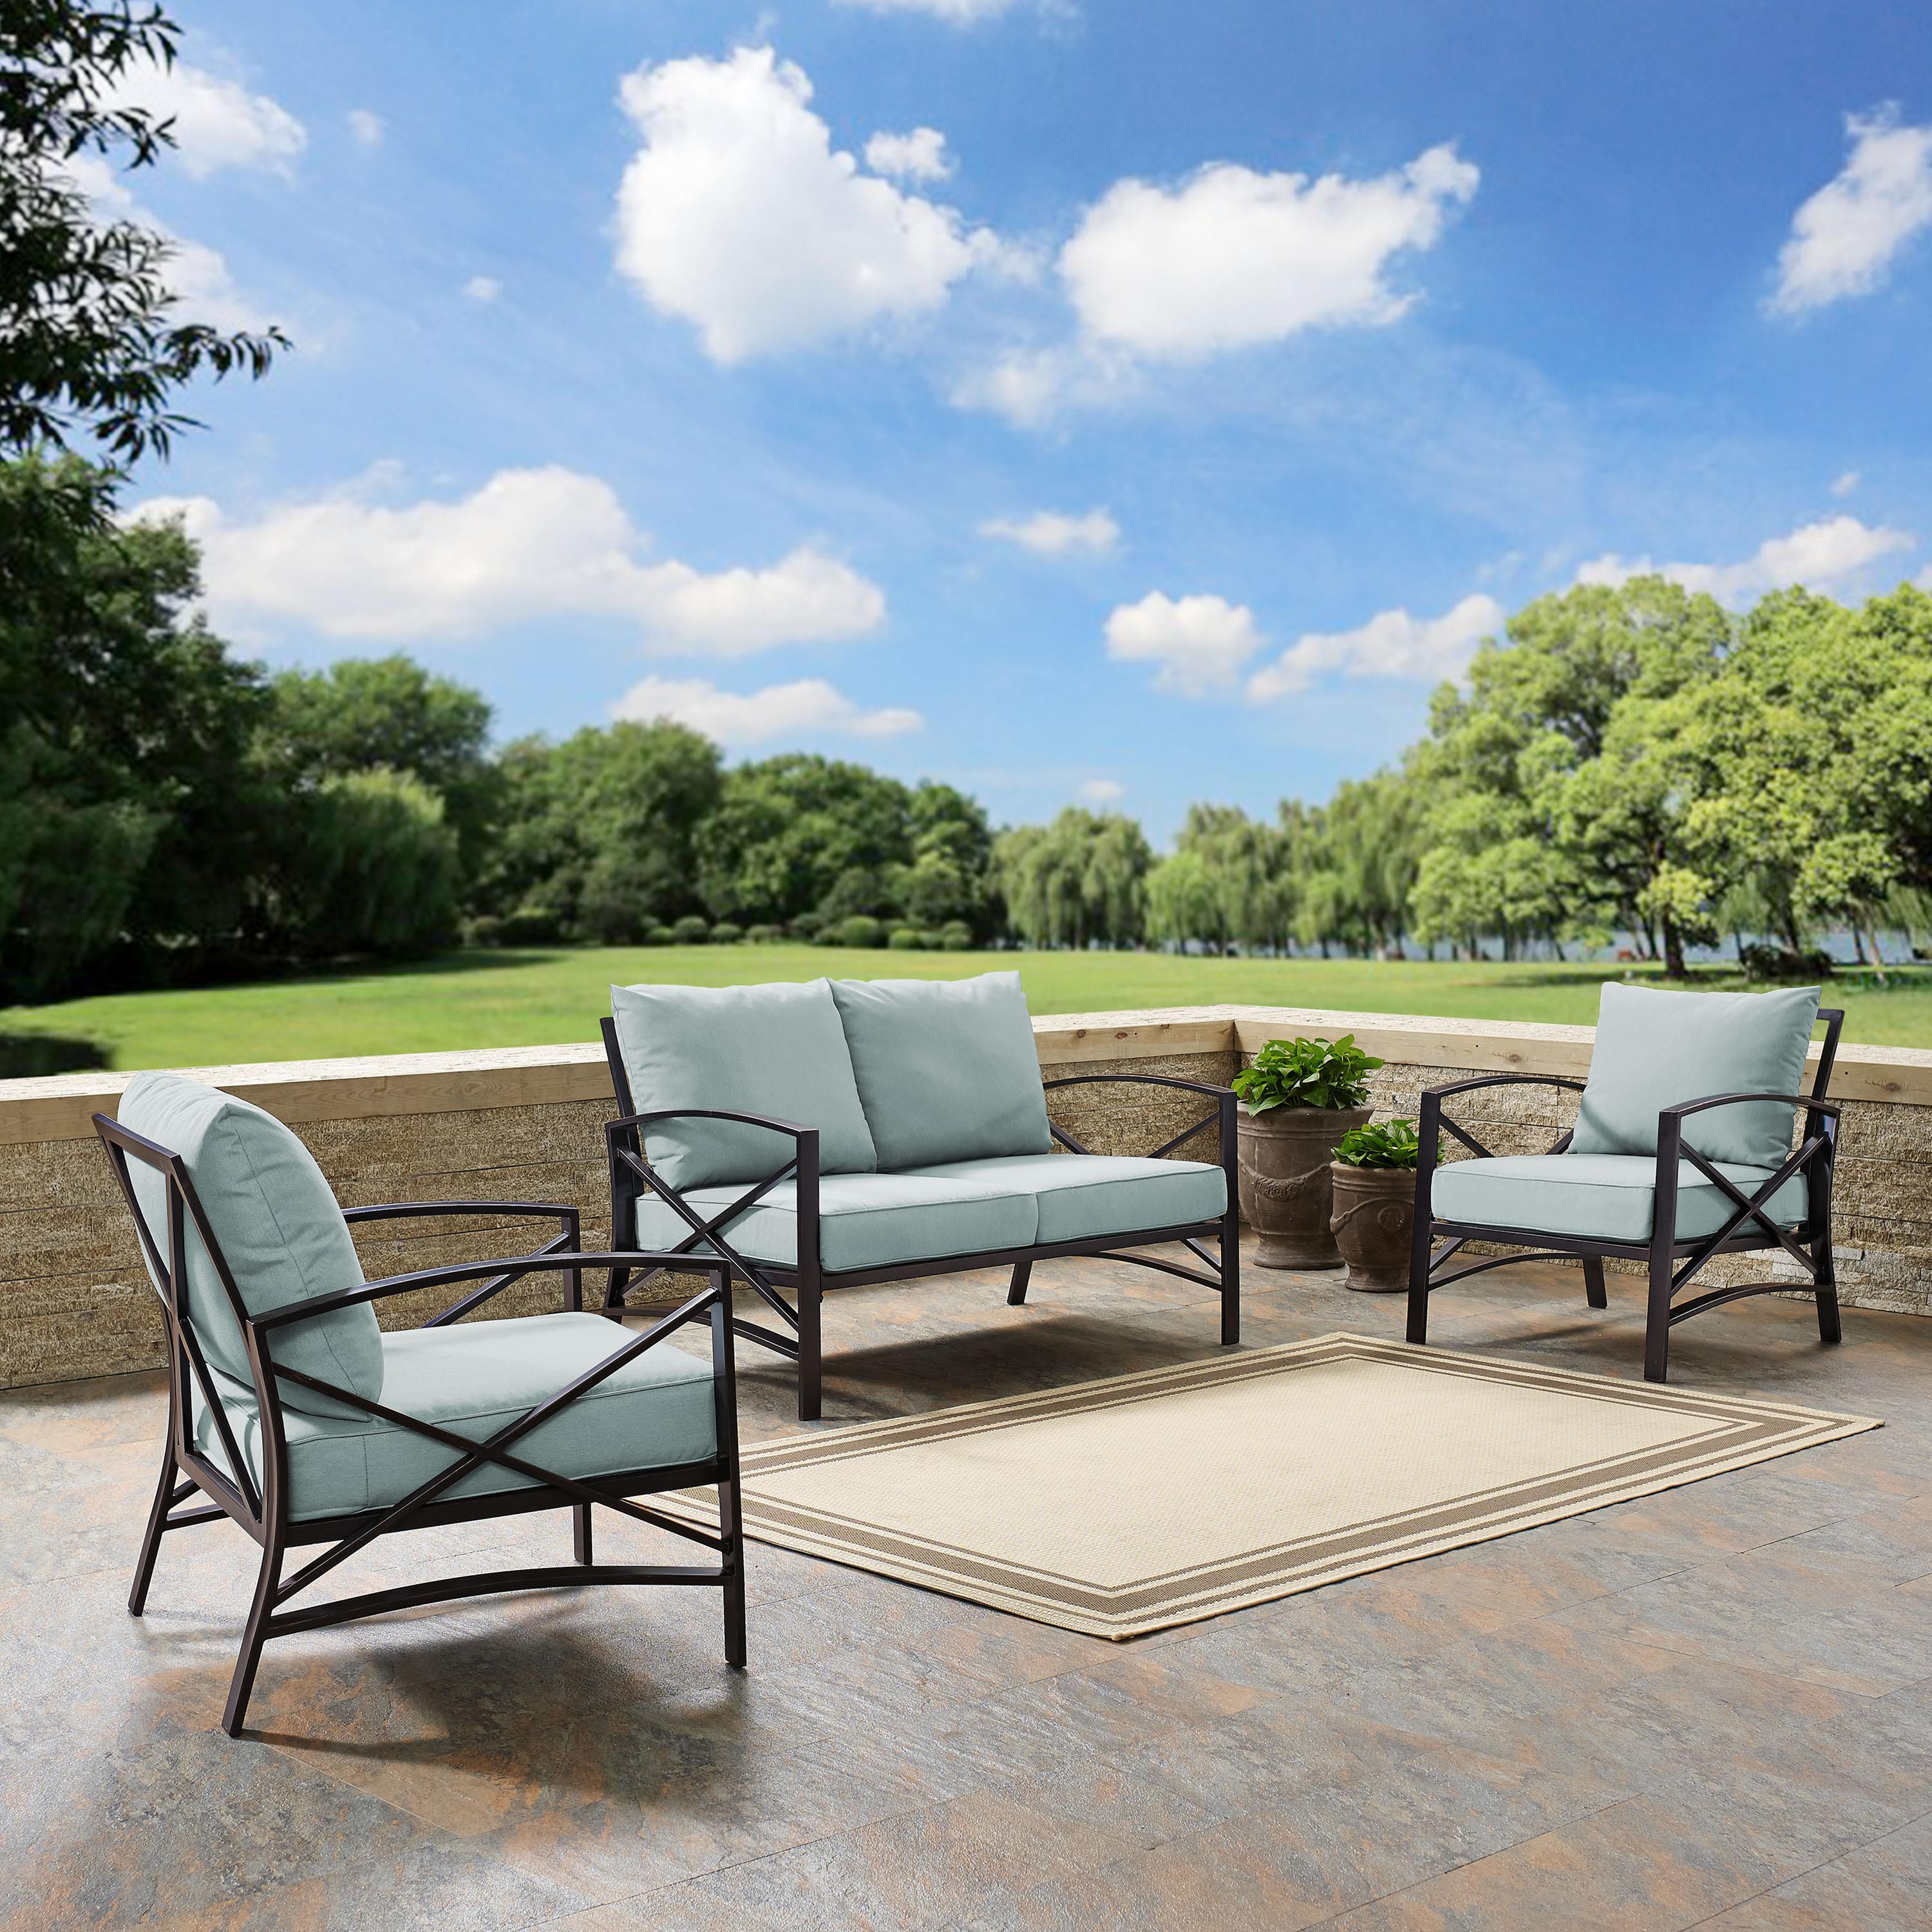 Crosley Furniture Kaplan 3 Pc Outdoor Seating Set With Mist Cushion - Loveseat, Two Outdoor Chairs - image 3 of 8